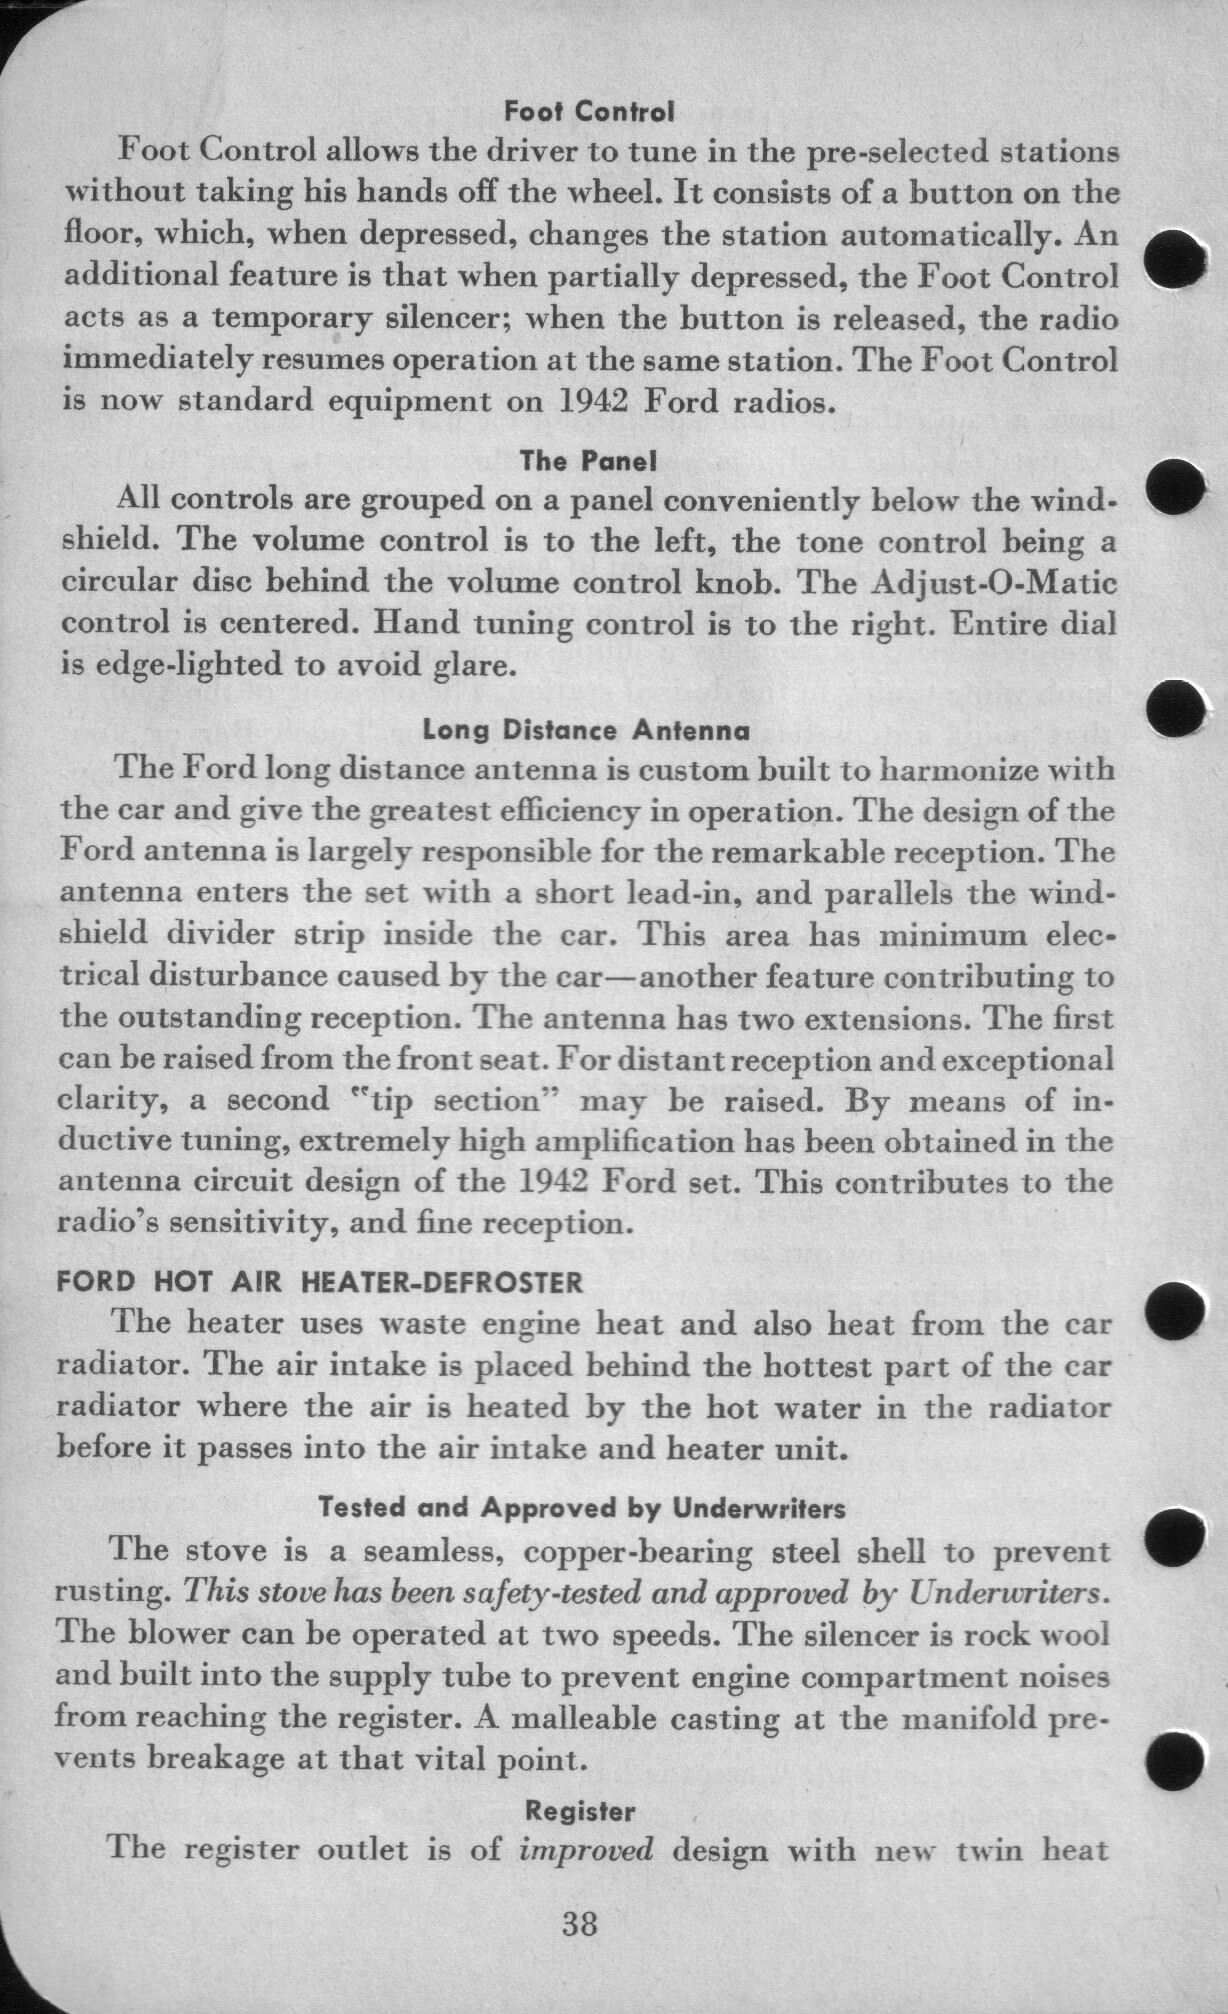 1942_Ford_Salesmans_Reference_Manual-038